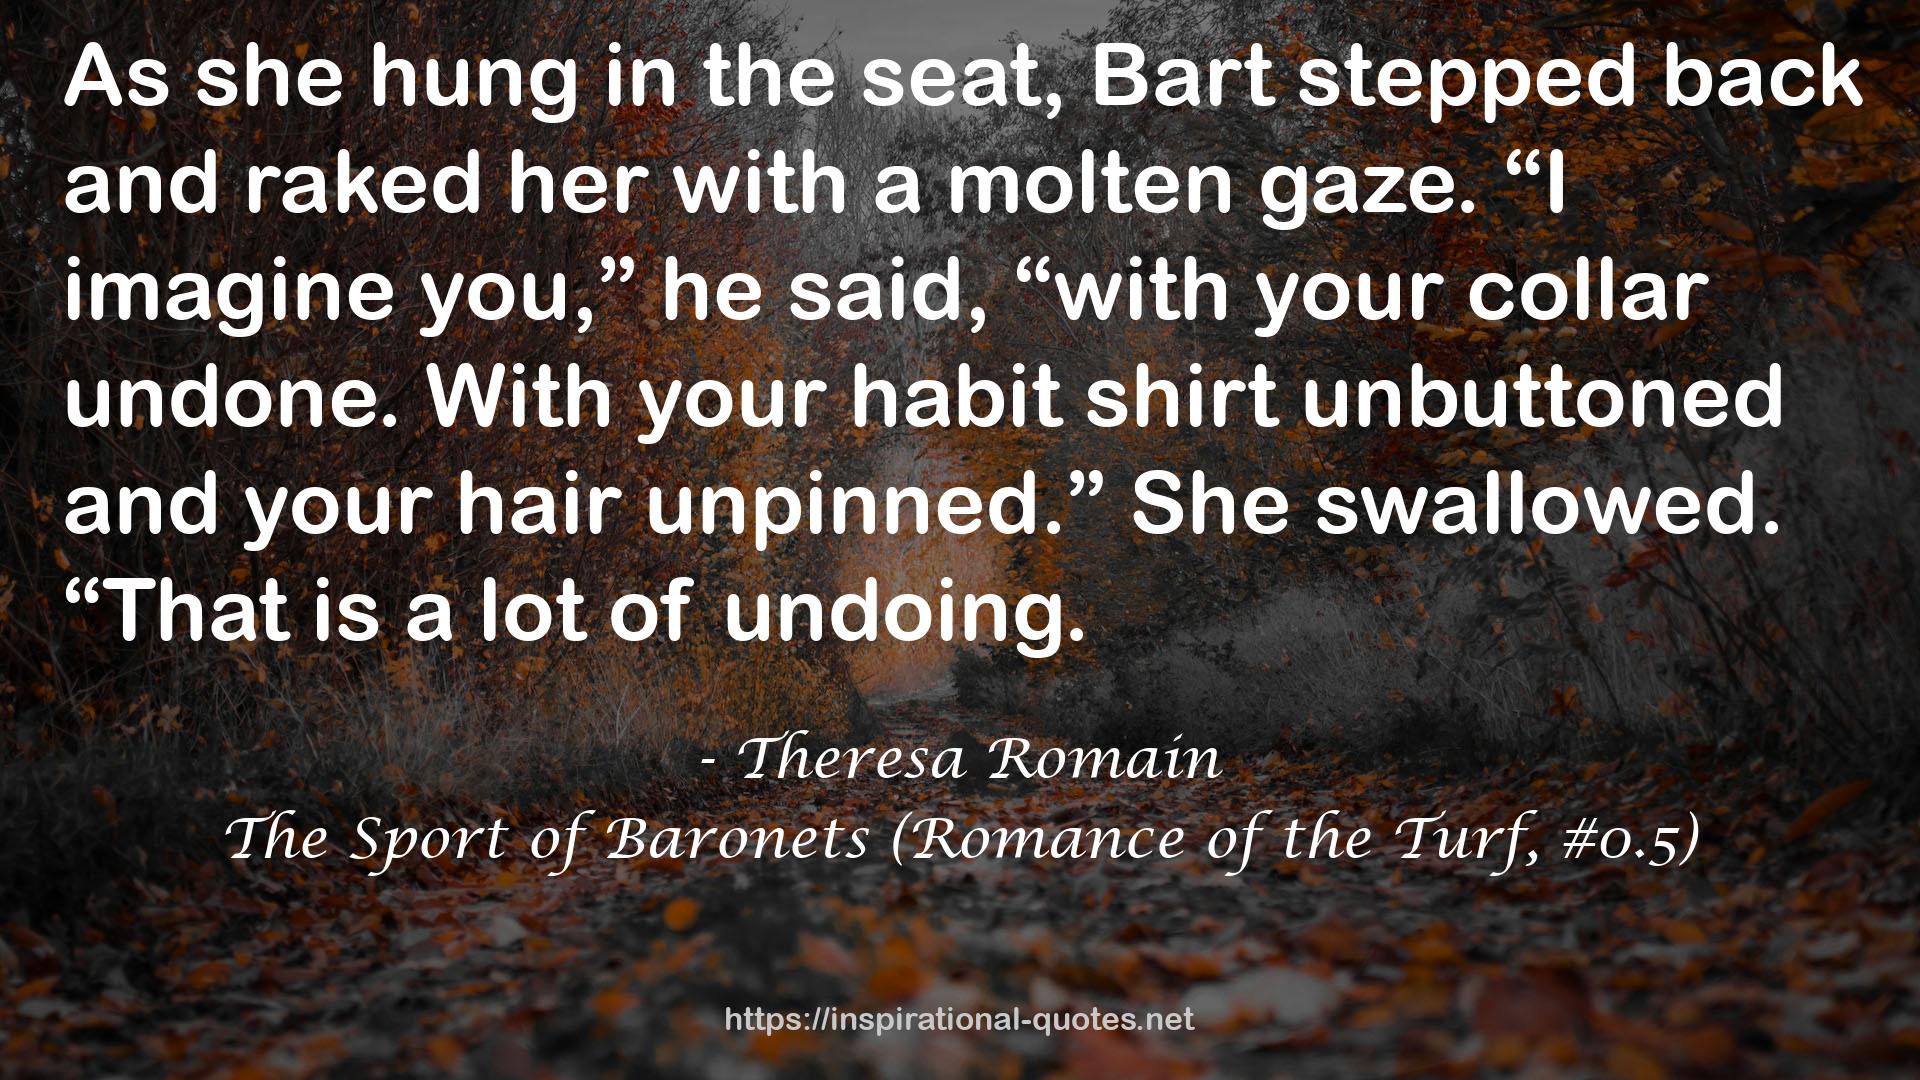 The Sport of Baronets (Romance of the Turf, #0.5) QUOTES